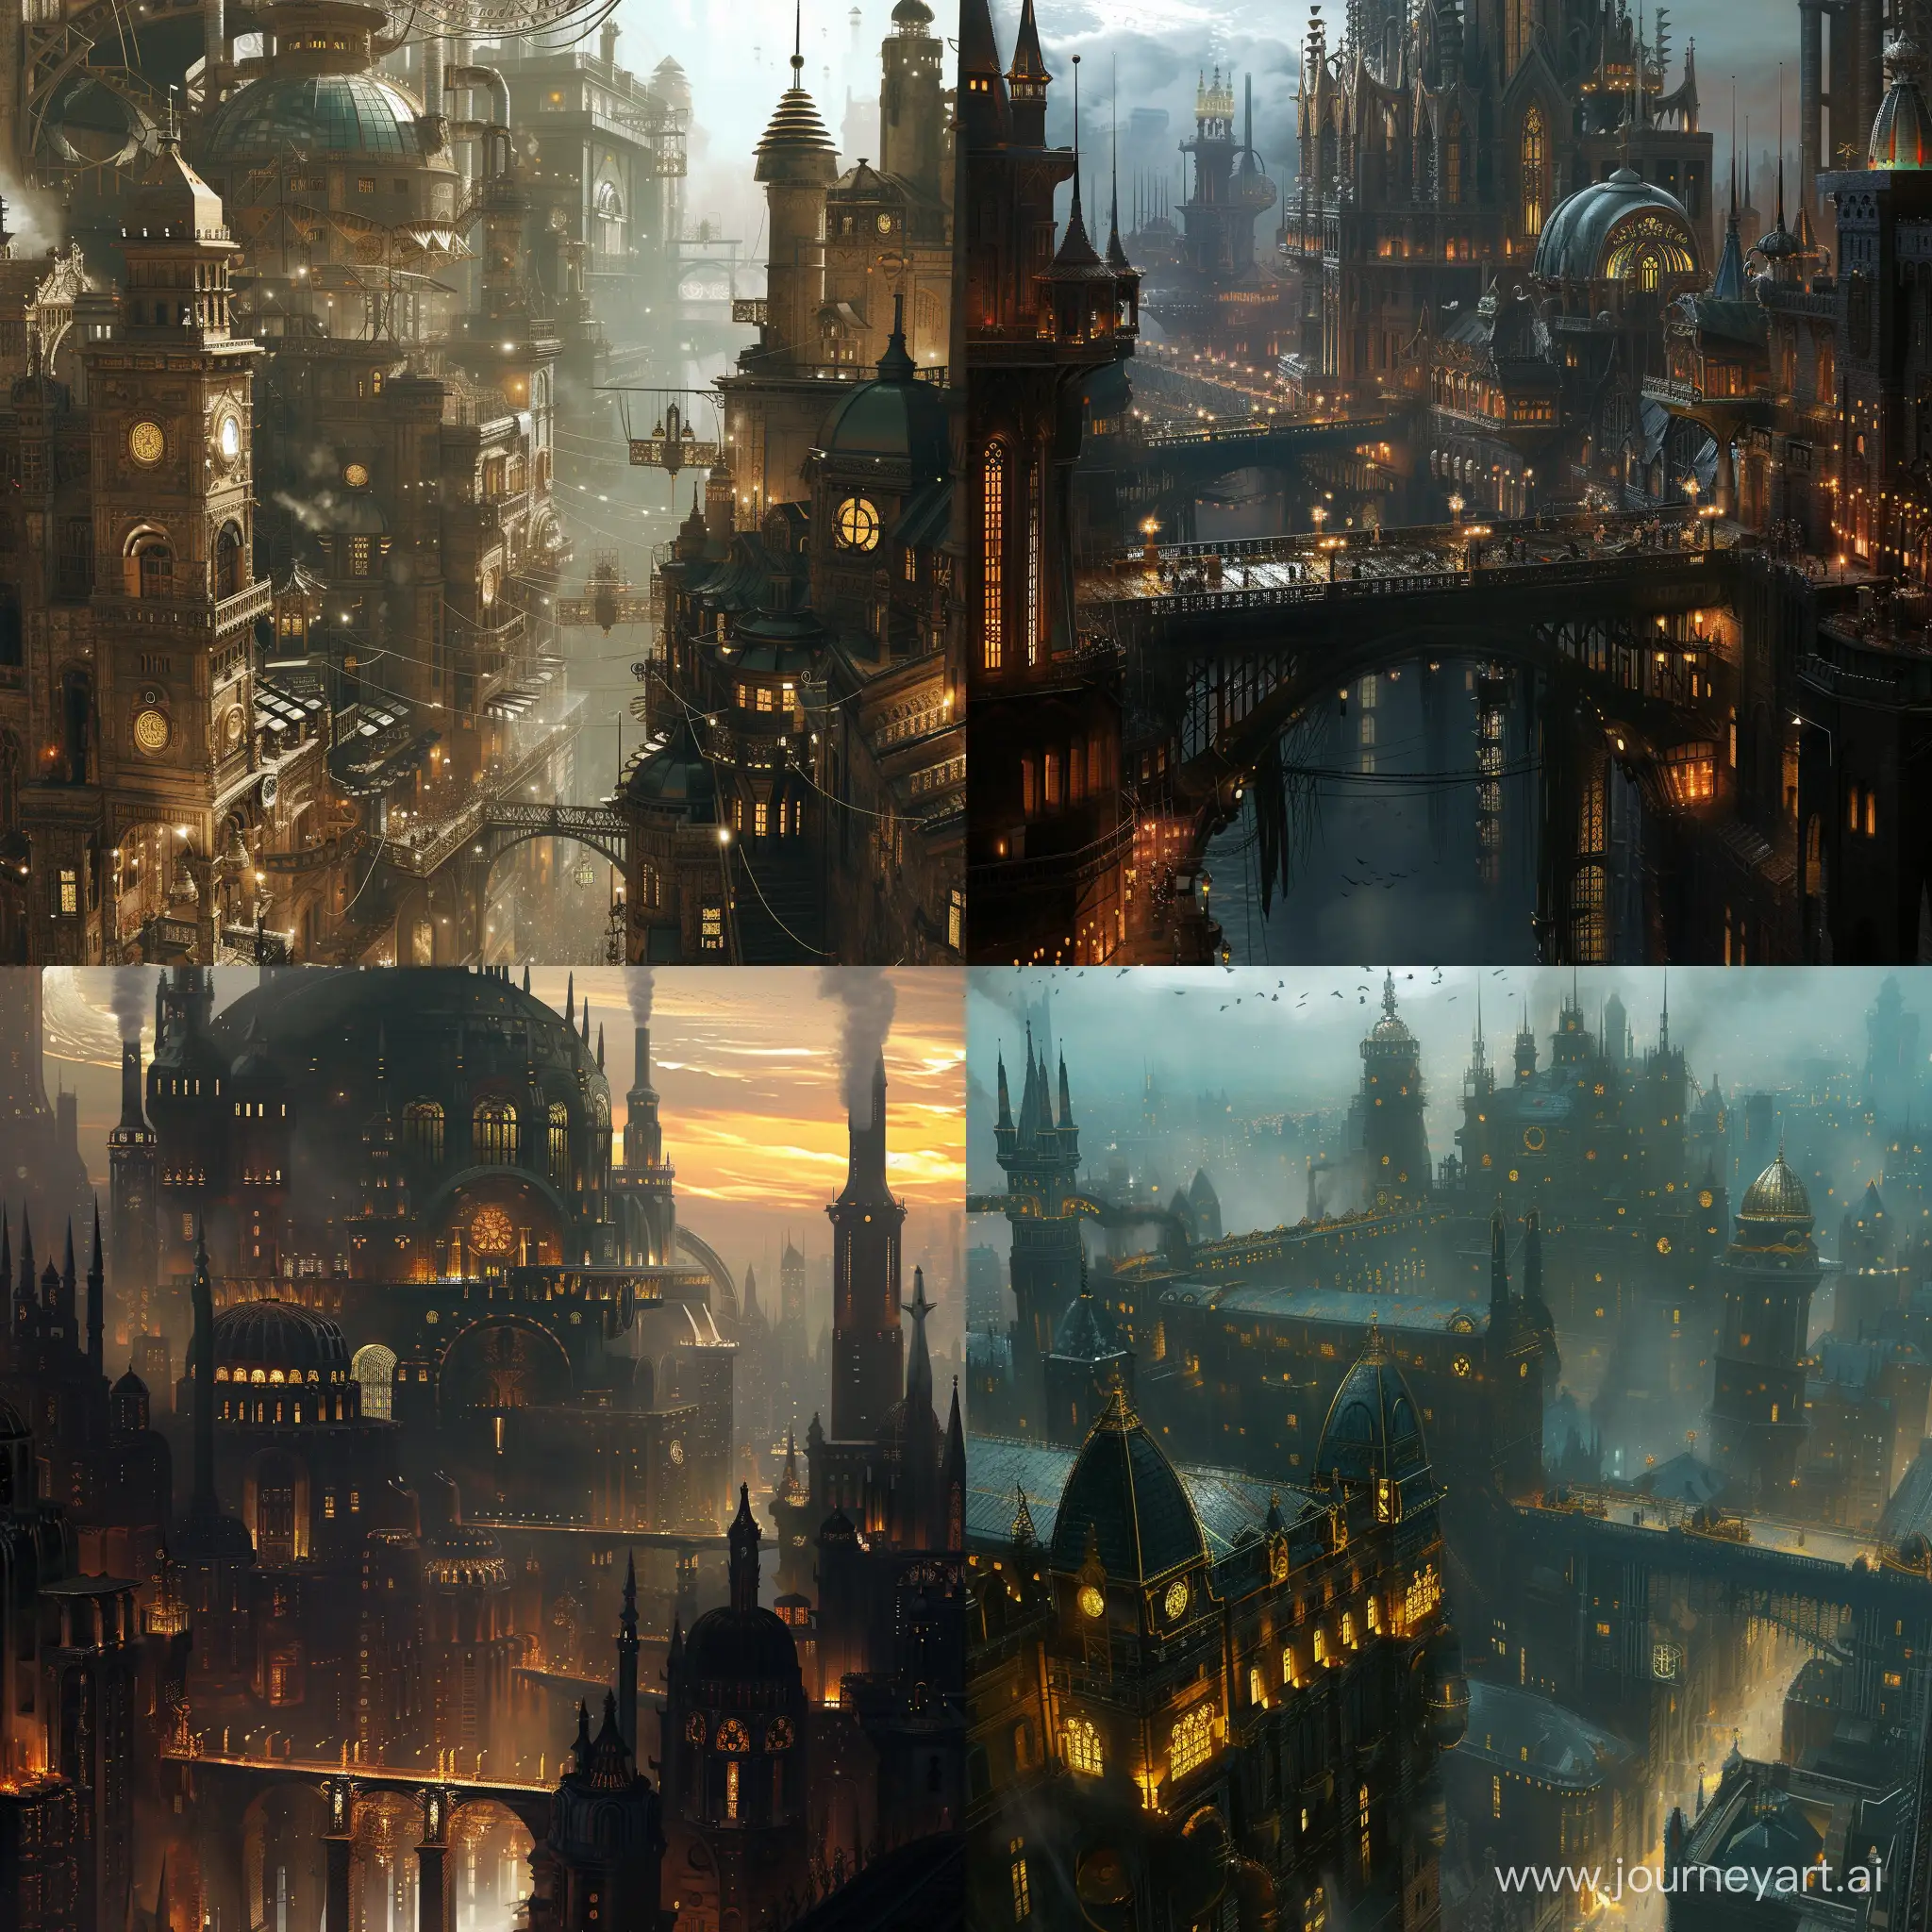 Fantasy-Steampunk-Cityscape-with-Intricate-Details-and-Victorian-Charm